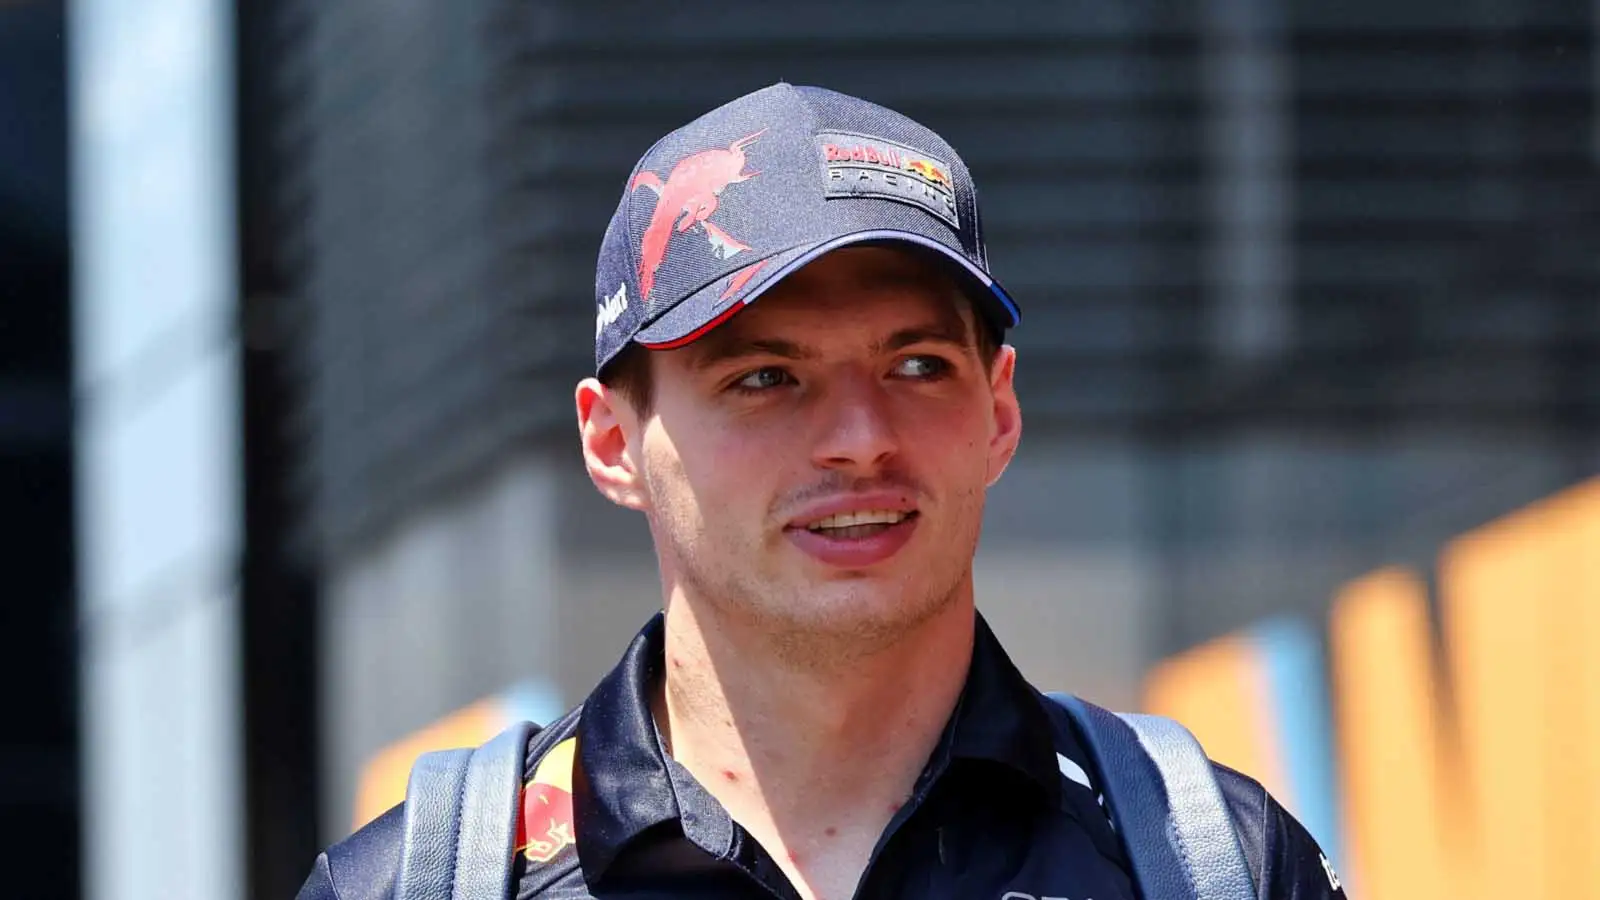 Max Verstappen in the paddock. France July 2022.